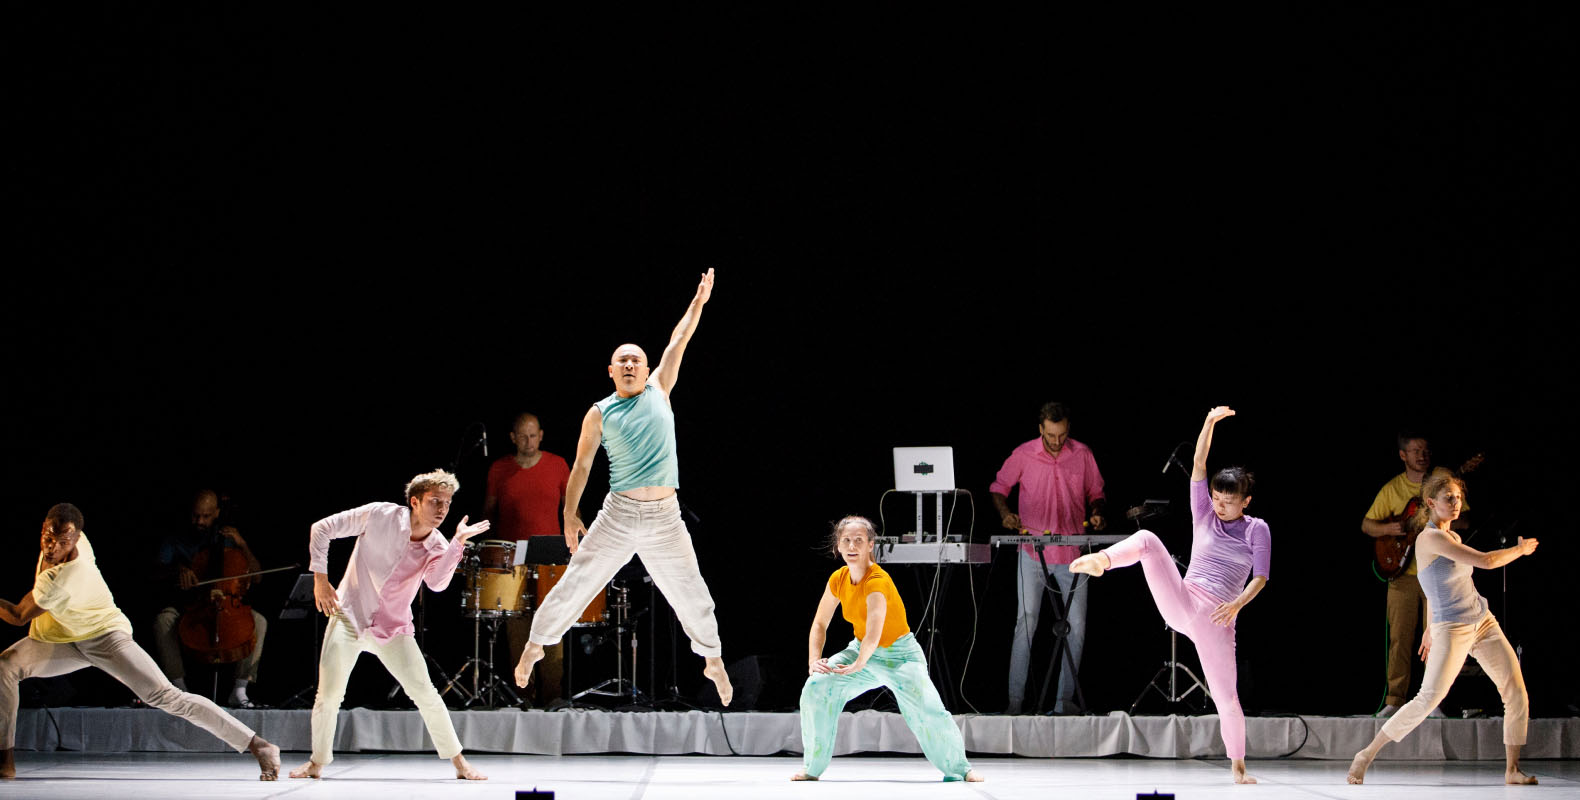 Performers on stage dancing in a variety of poses